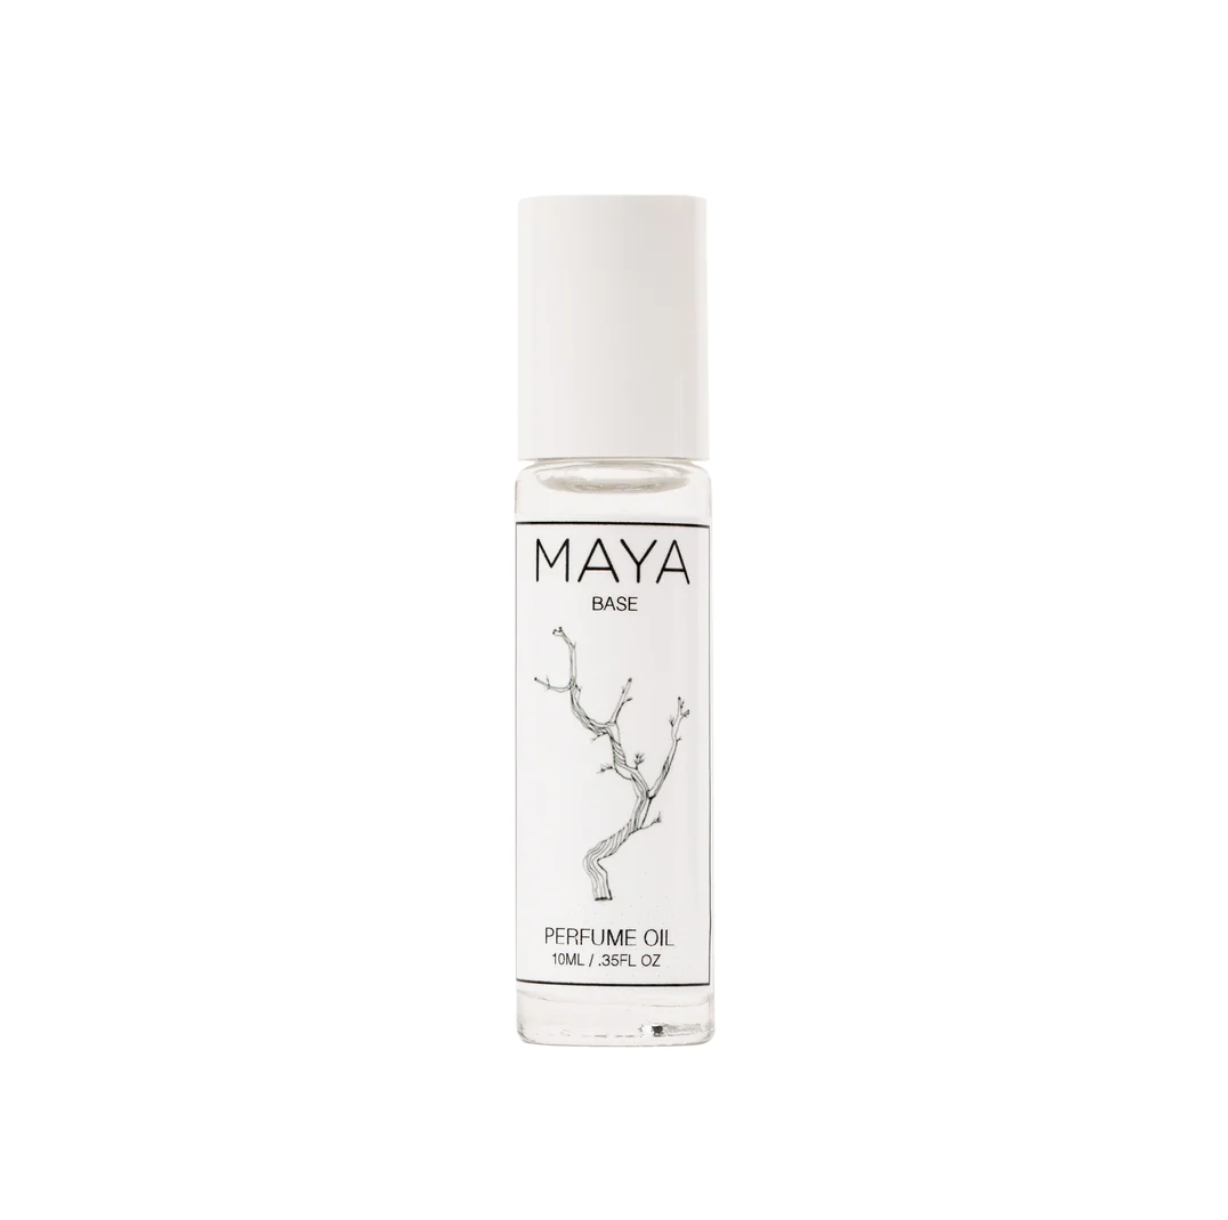 A clear glass bottle of "MAYA BASE 10ML" perfume oil from Maya Fragrances, labeled with a minimalist black and white design featuring a tree illustration, containing 10ml or .35 oz of product.